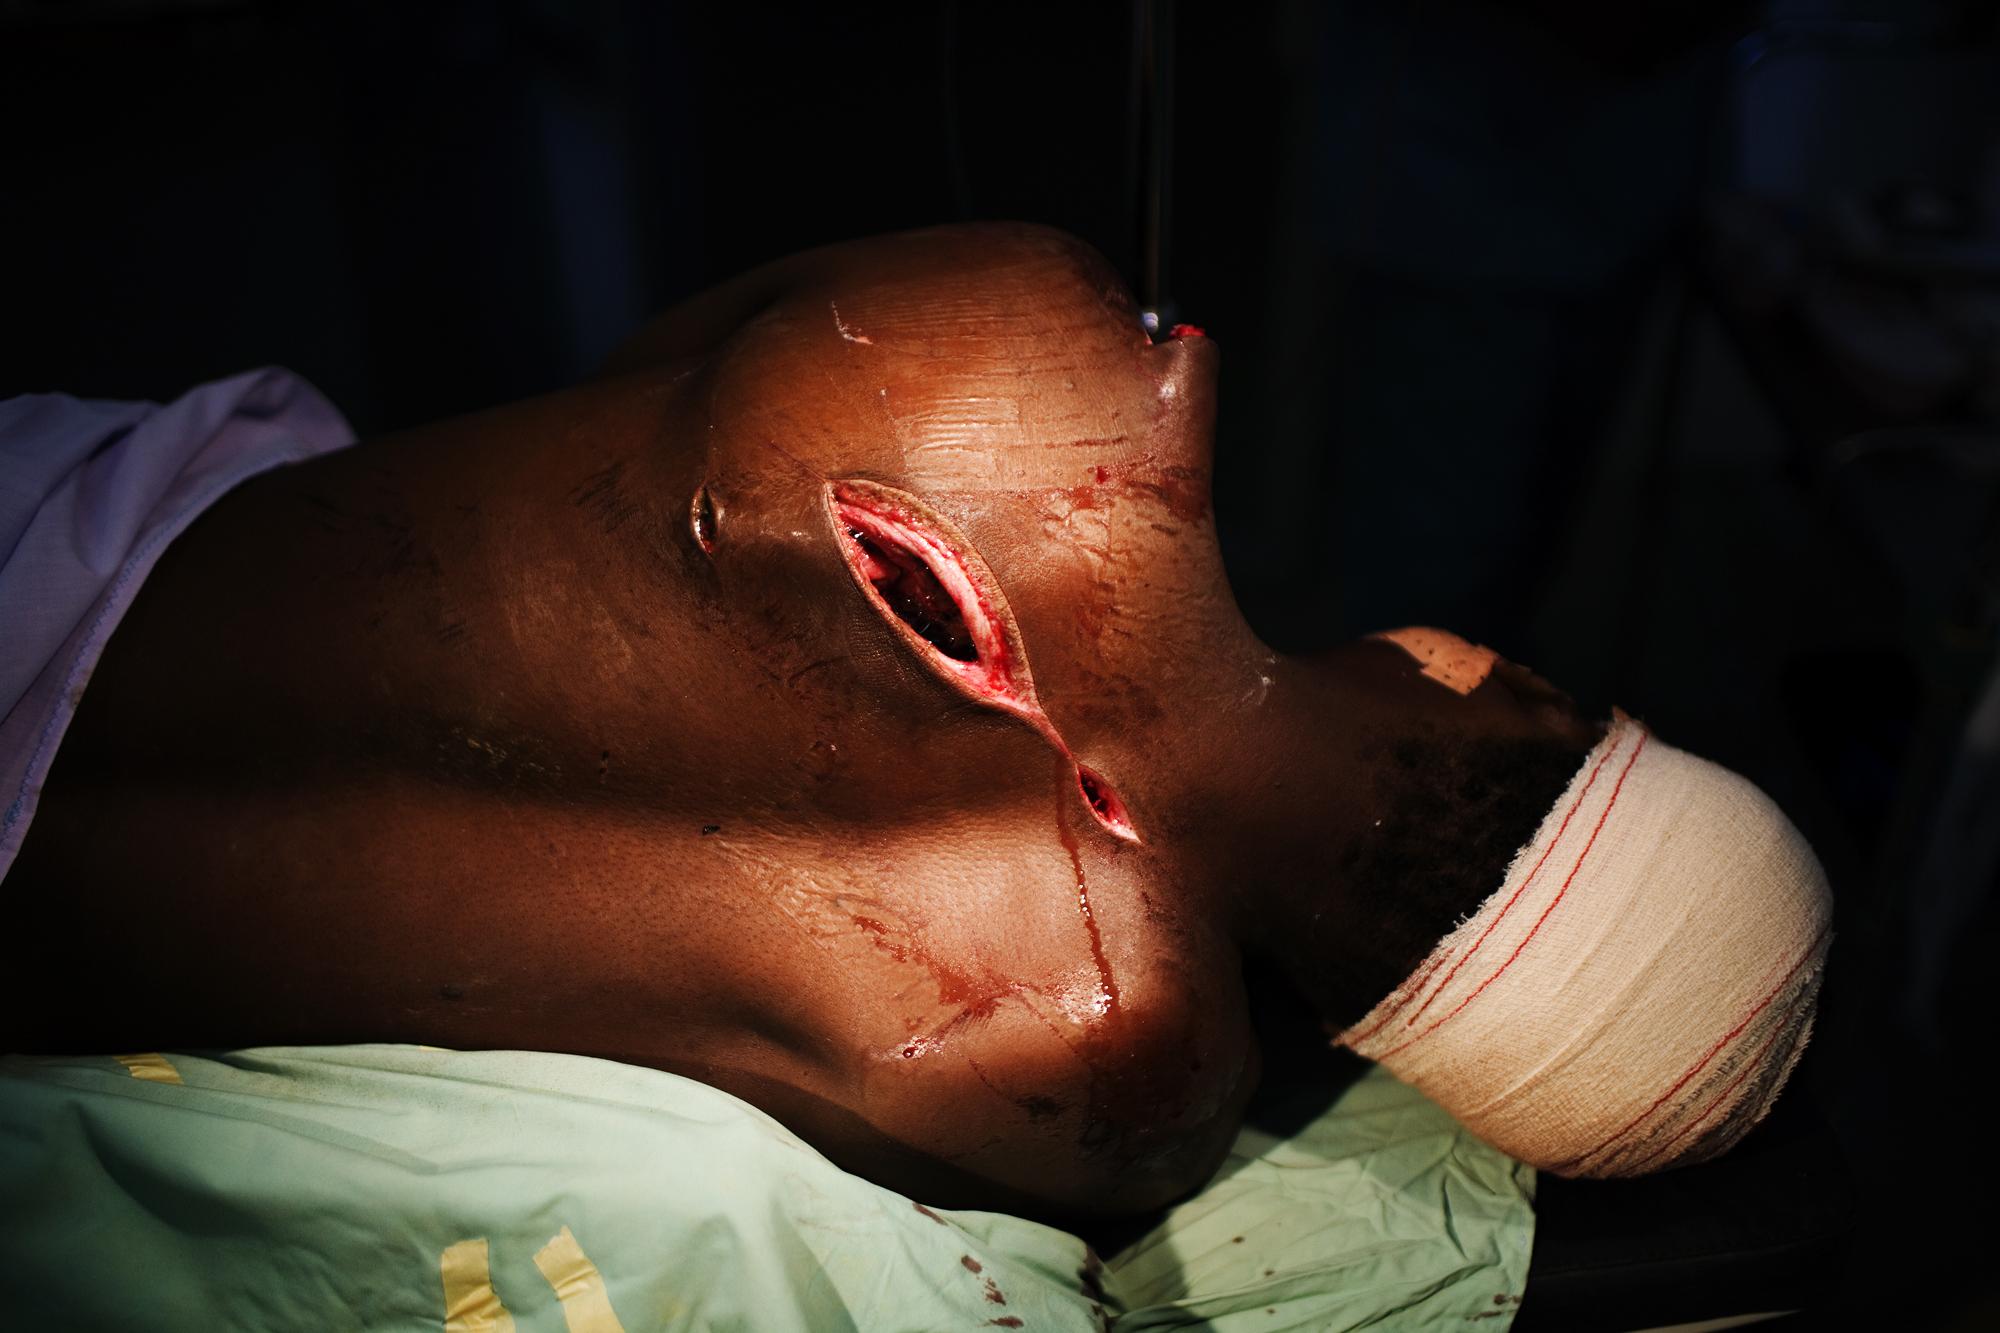 Haiti for MSF - HAITI Cite Soleil, Port-au-Prince
A wounded man is...